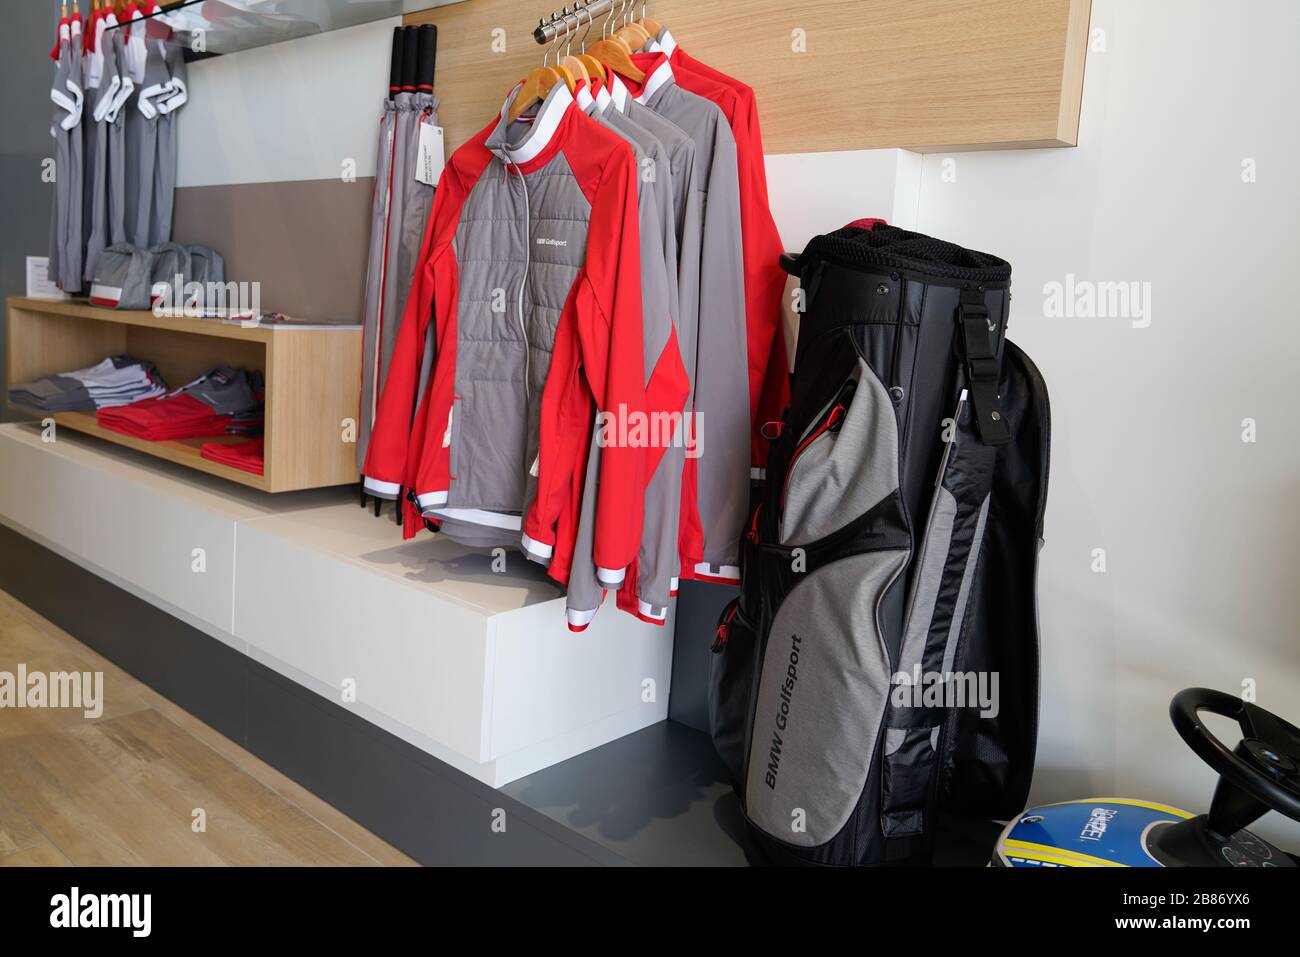 Bordeaux , Aquitaine / France - 10 11 2019 : Shopping Mall BMW Store  clothing golf retail shop+ Stock Photo - Alamy